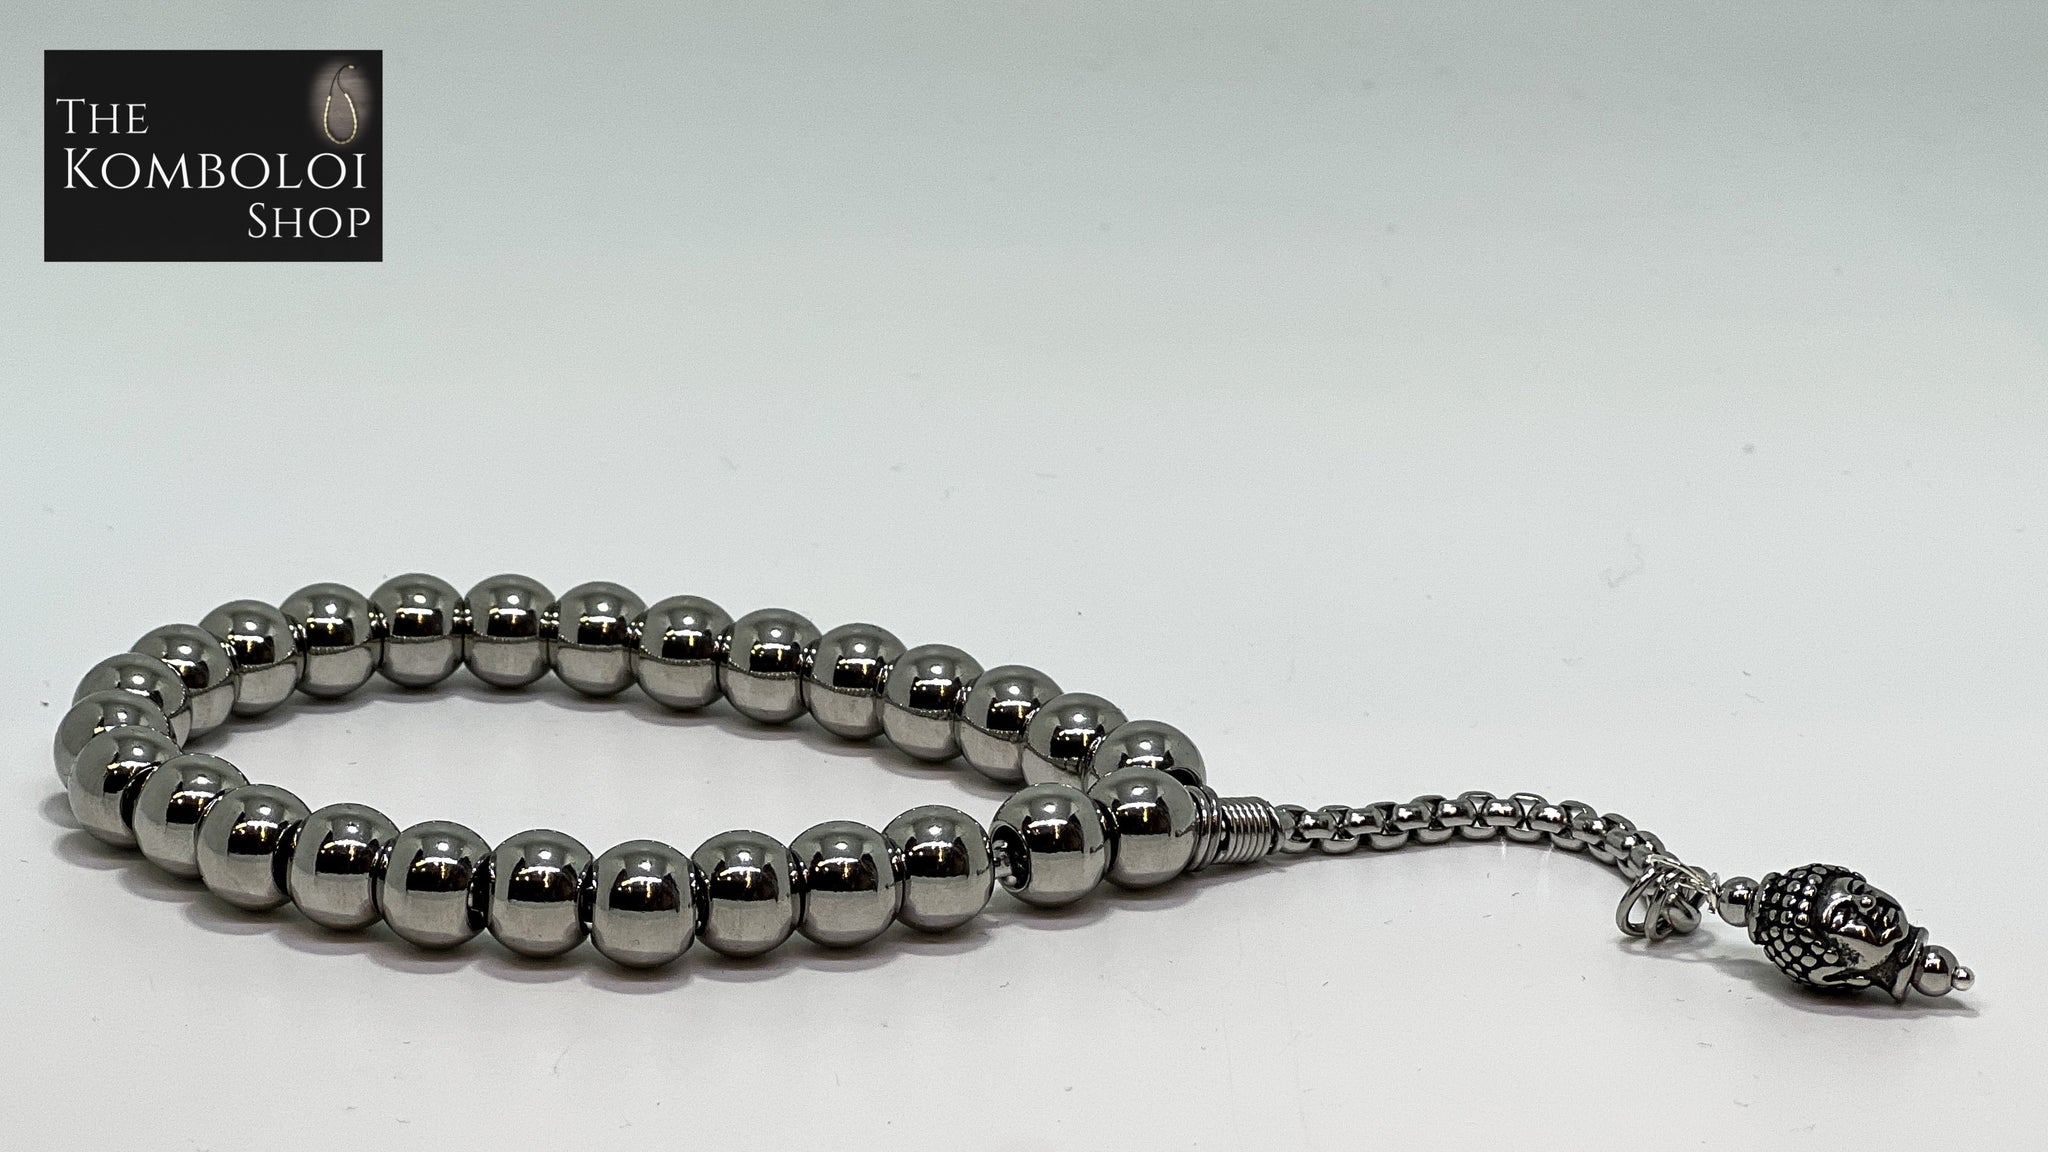 Stainless Steel Hand Held Worry Beads with Buddha